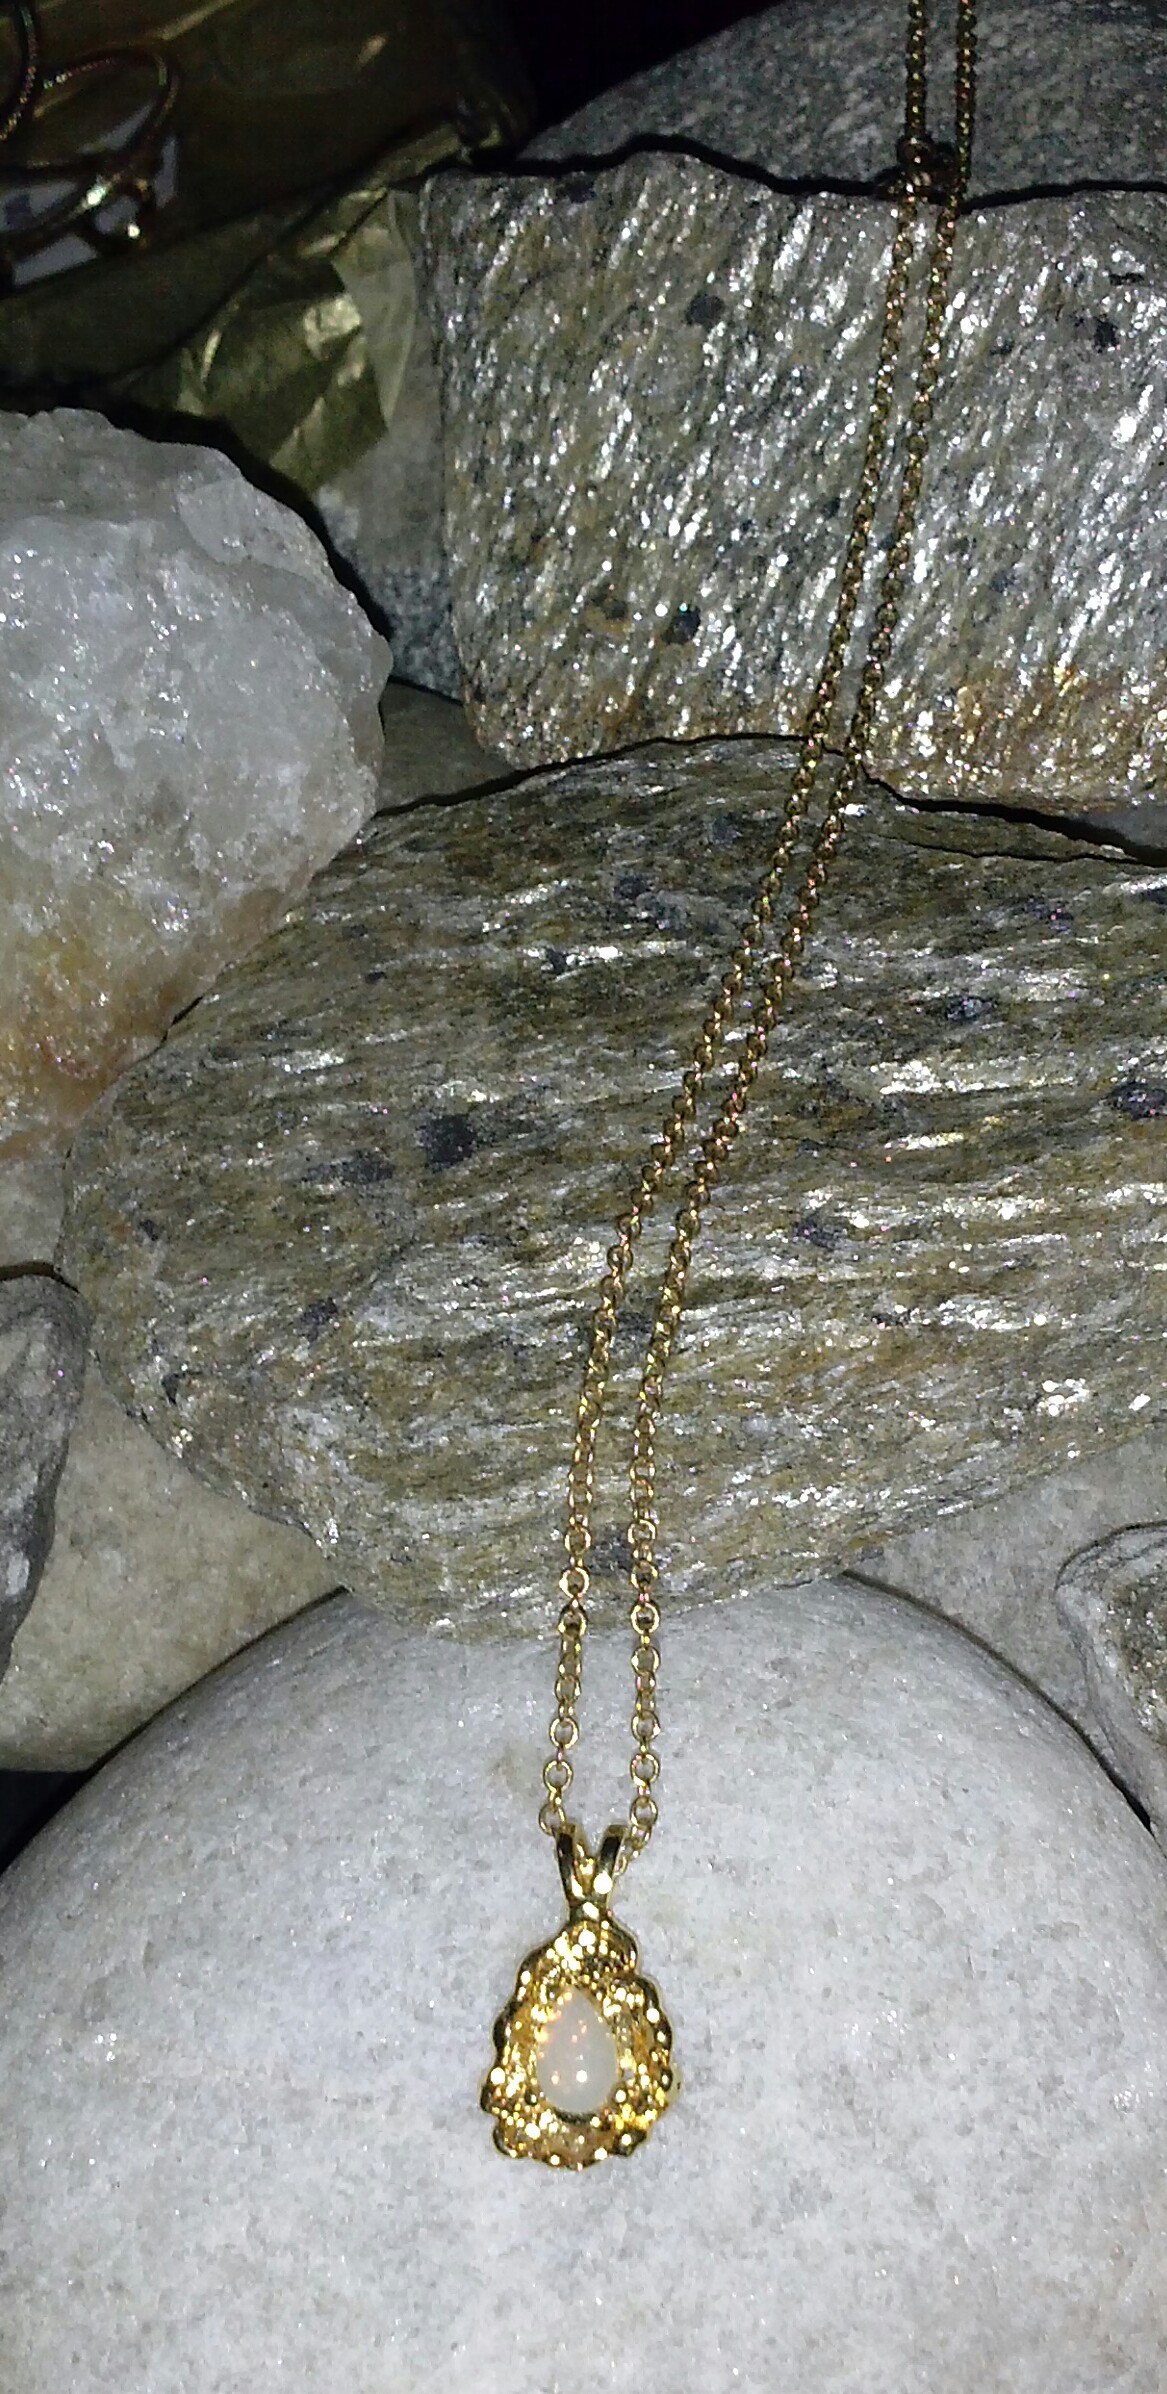 Adorable gold tone chain with beautiful charm/pendant